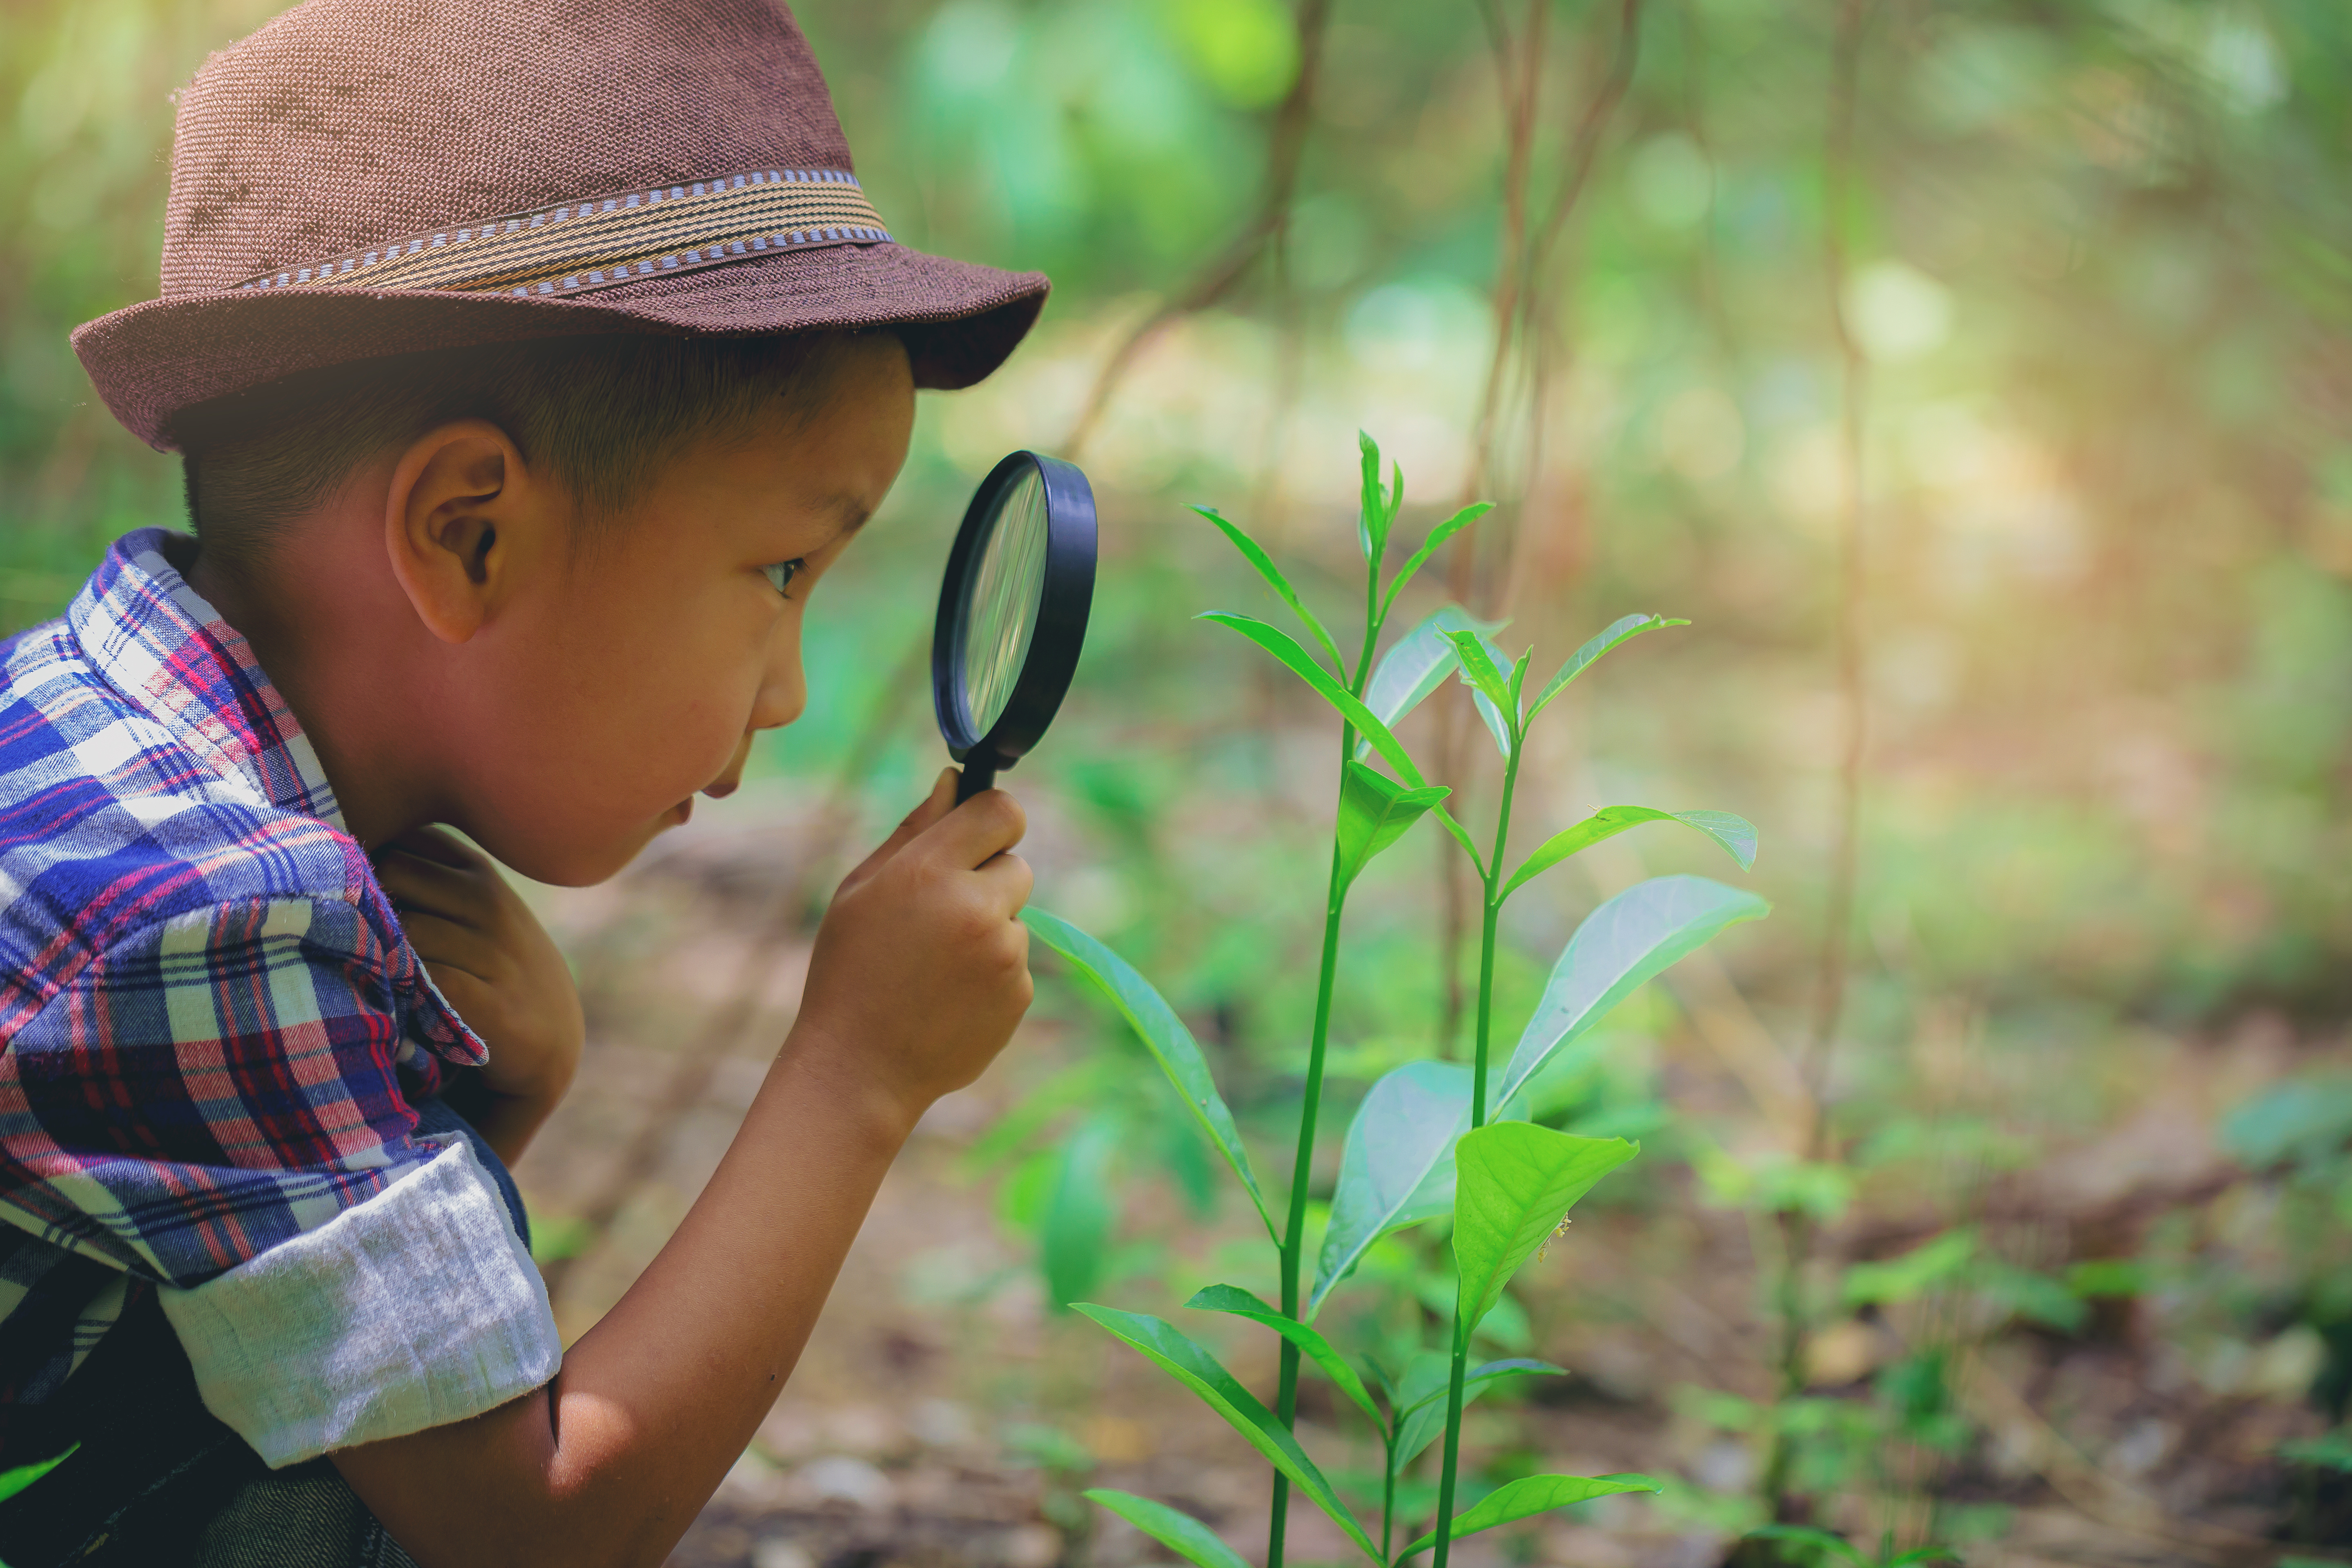 A child closely studies a plant with a magnifying glass